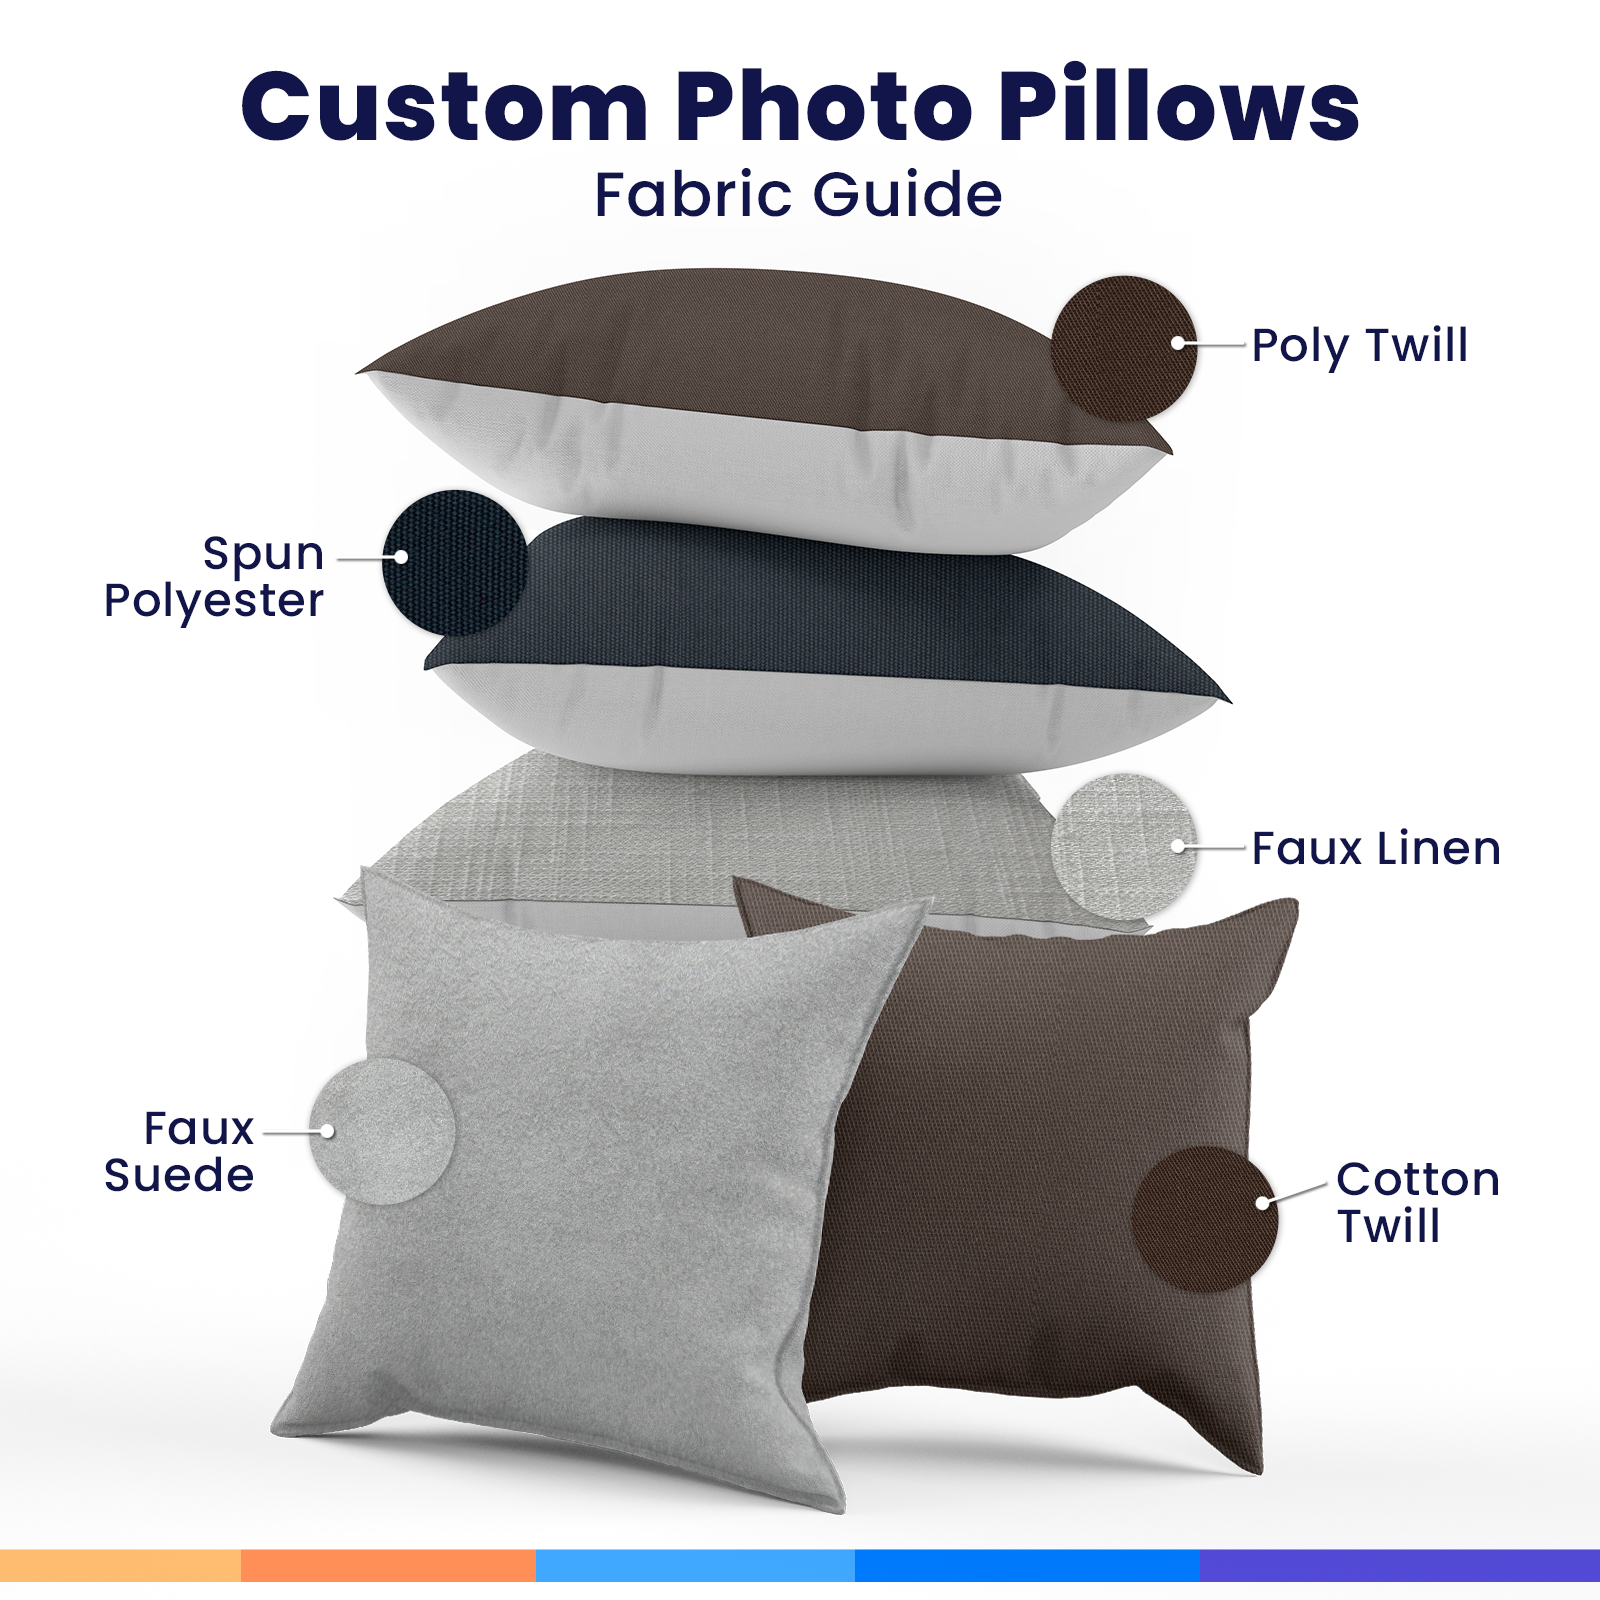 4 Image Grid Gallery Photo Pillow